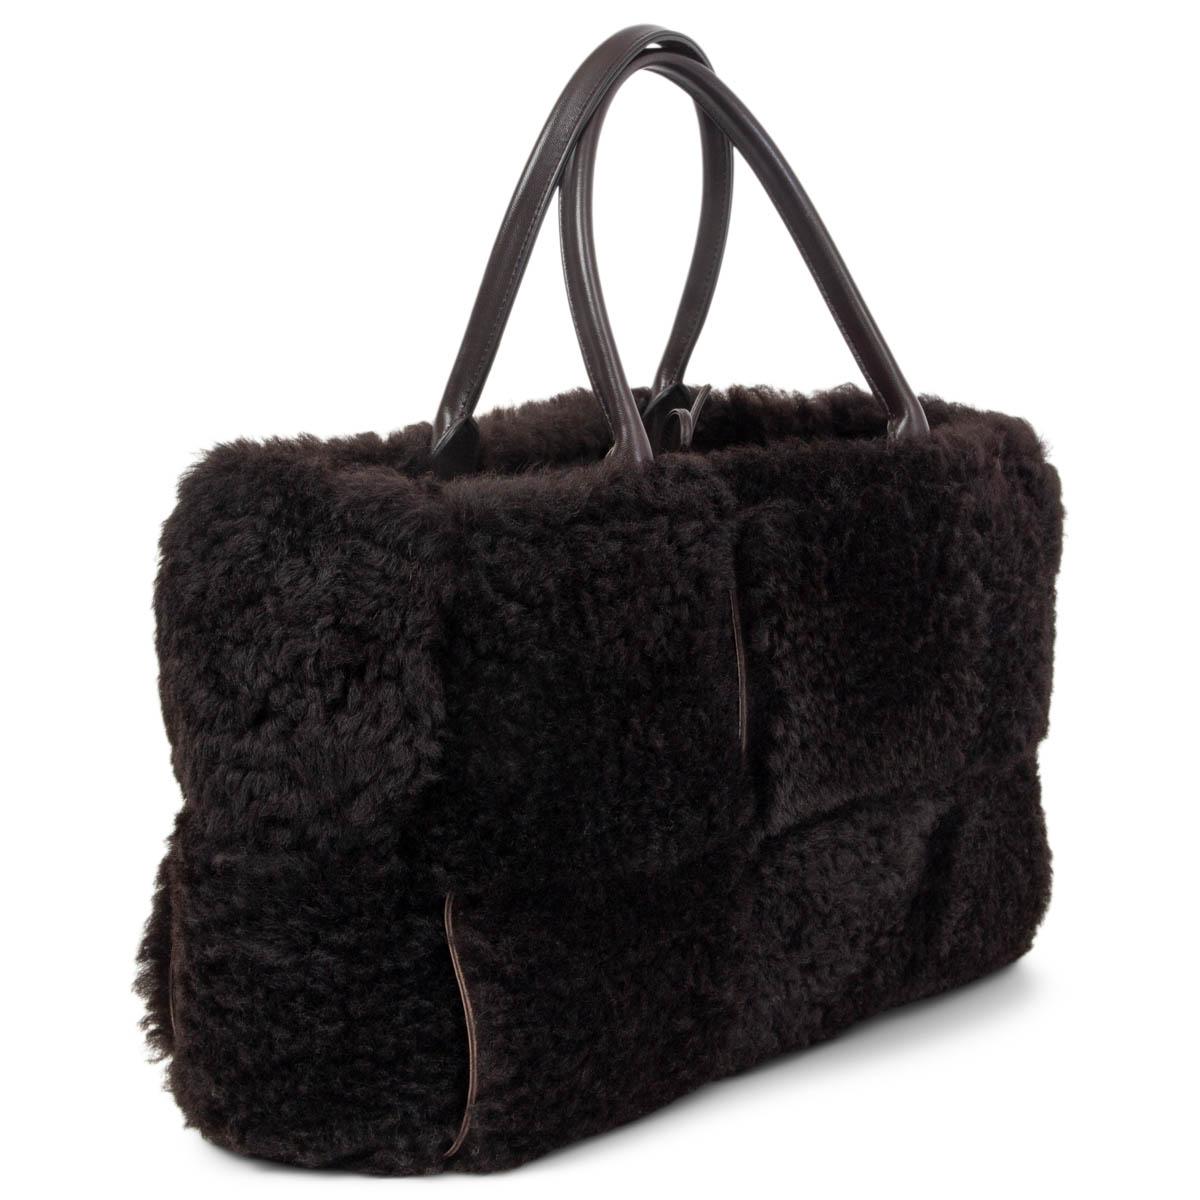 100% authentic BBottega Veneta Medium Arco Intrecciato tote bag in Fondant (espresso brown) fluffy shearling hand-woven into a blown-up intrecciato pattern. Made with tonal leather top handles and a detachable zipper pouch. Has been carried and is